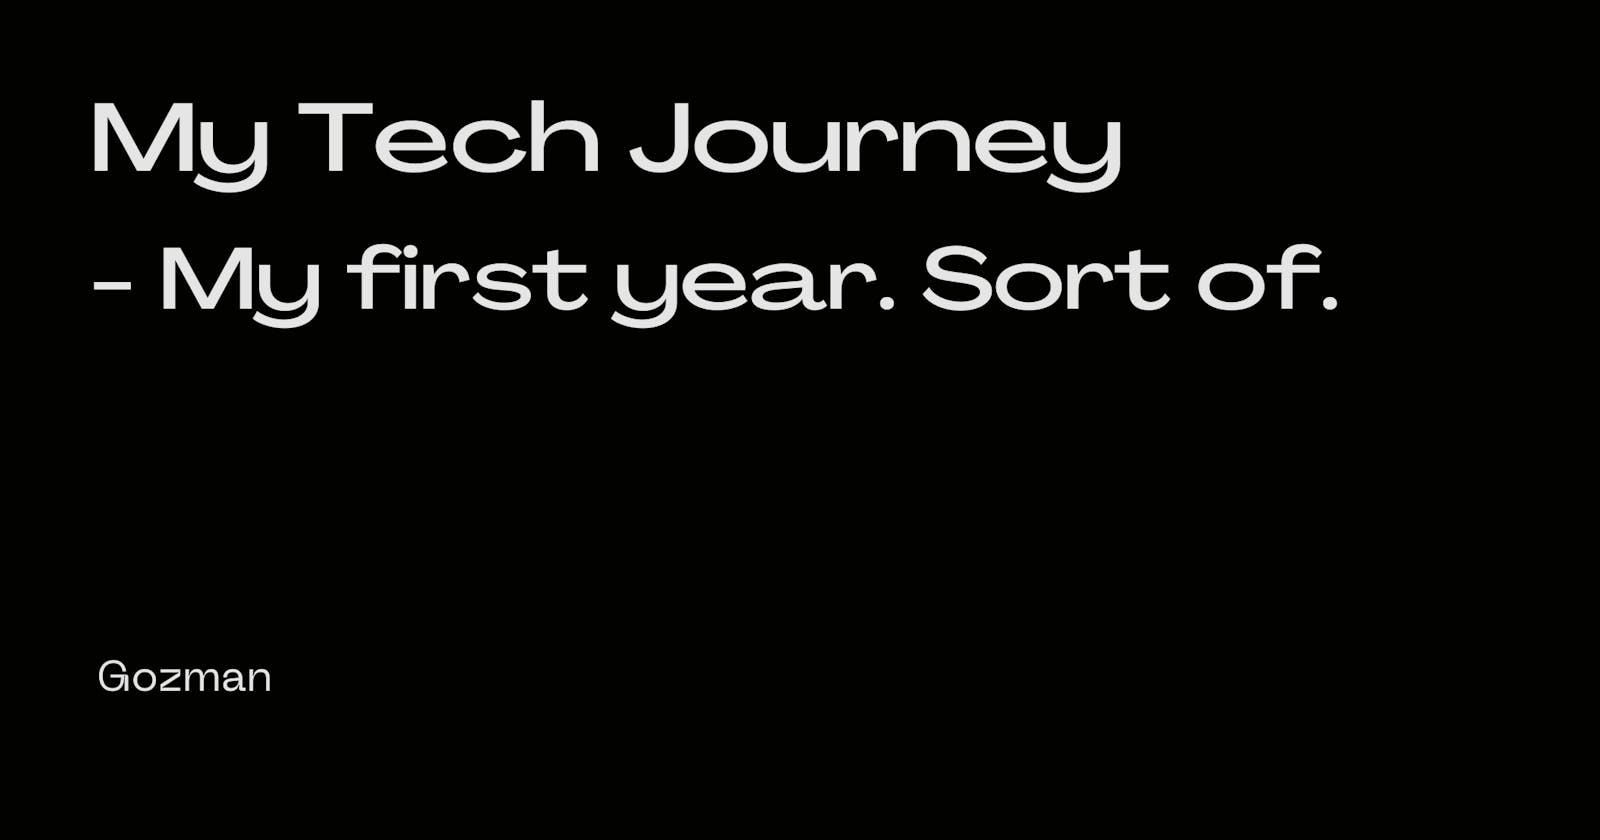 My Tech Journey - My first year. Sort of.